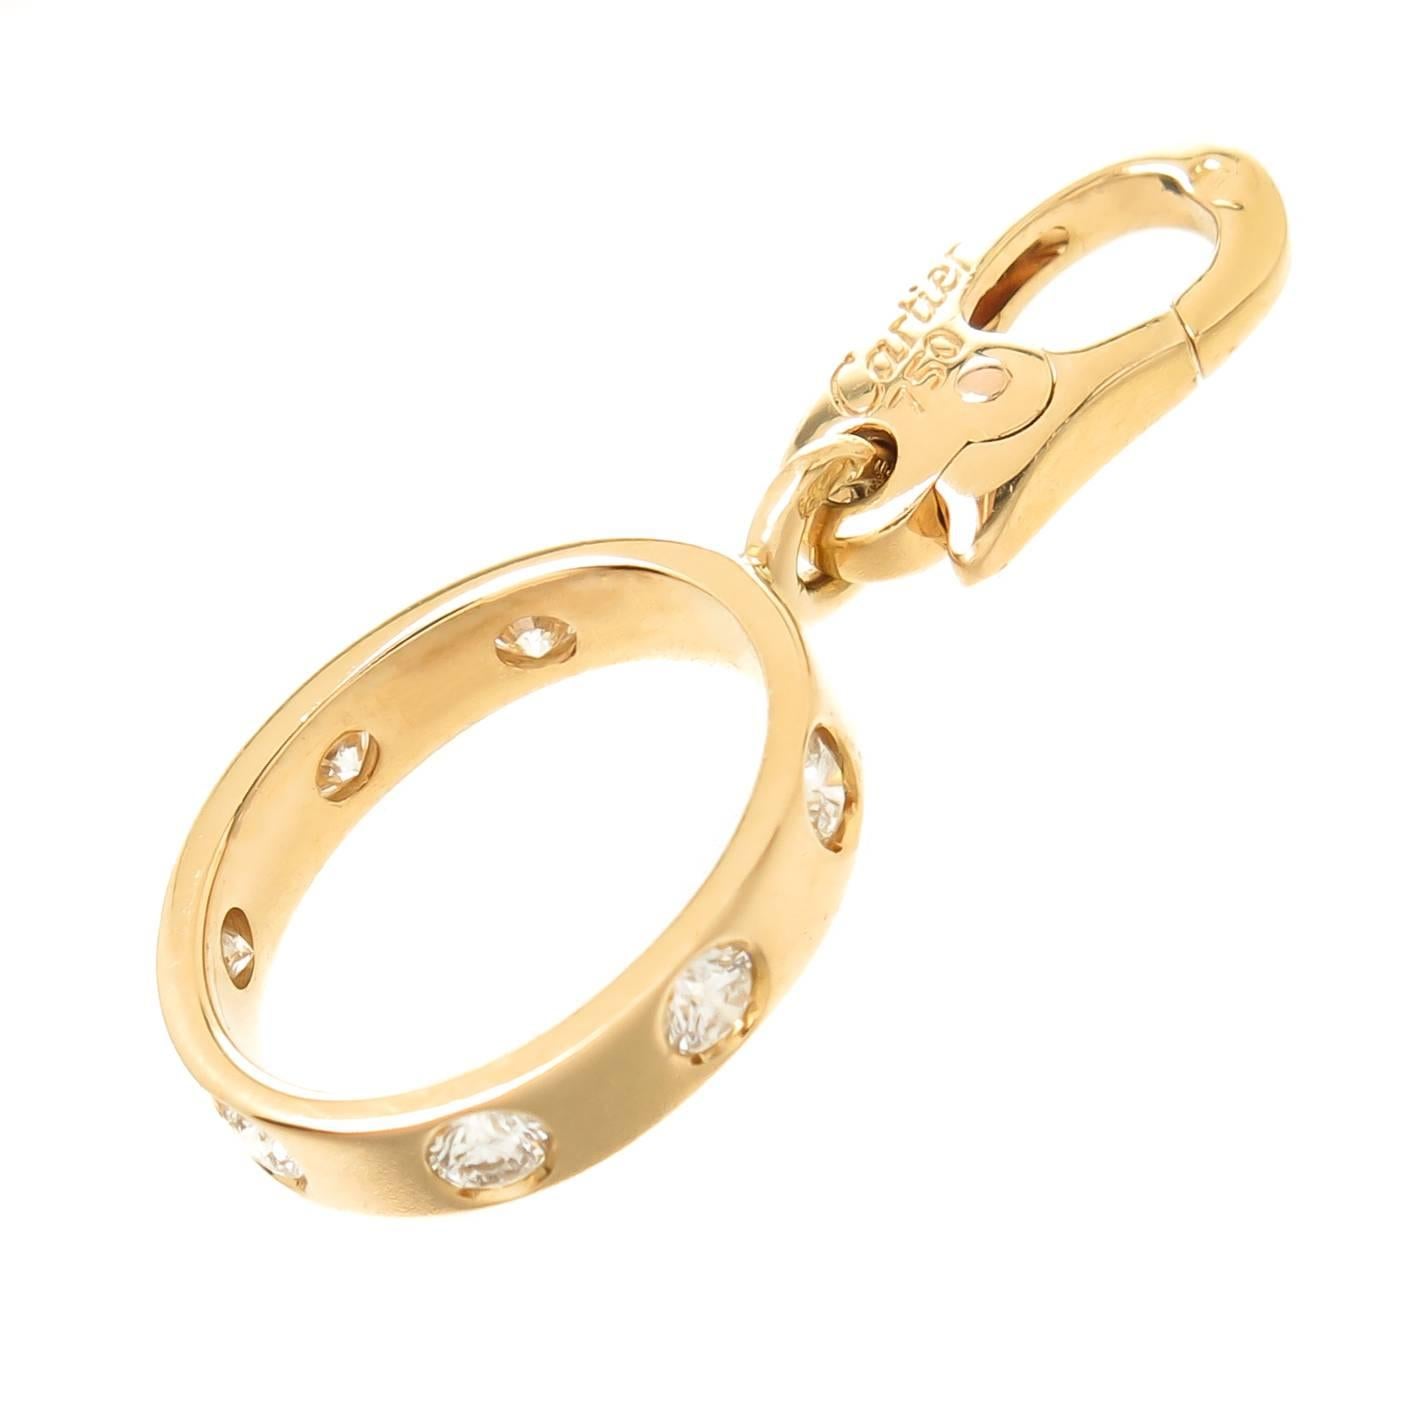 Circa 2000 Cartier Love Ring Charm, 18K Yellow Gold and set with Round Brilliant cut Diamonds totaling 1/4 Carat. The charm measures 1/2 inch in length X 7/16 inch.  Having a lobster Claw lock for easy take on and off so it can be worn on a bracelet